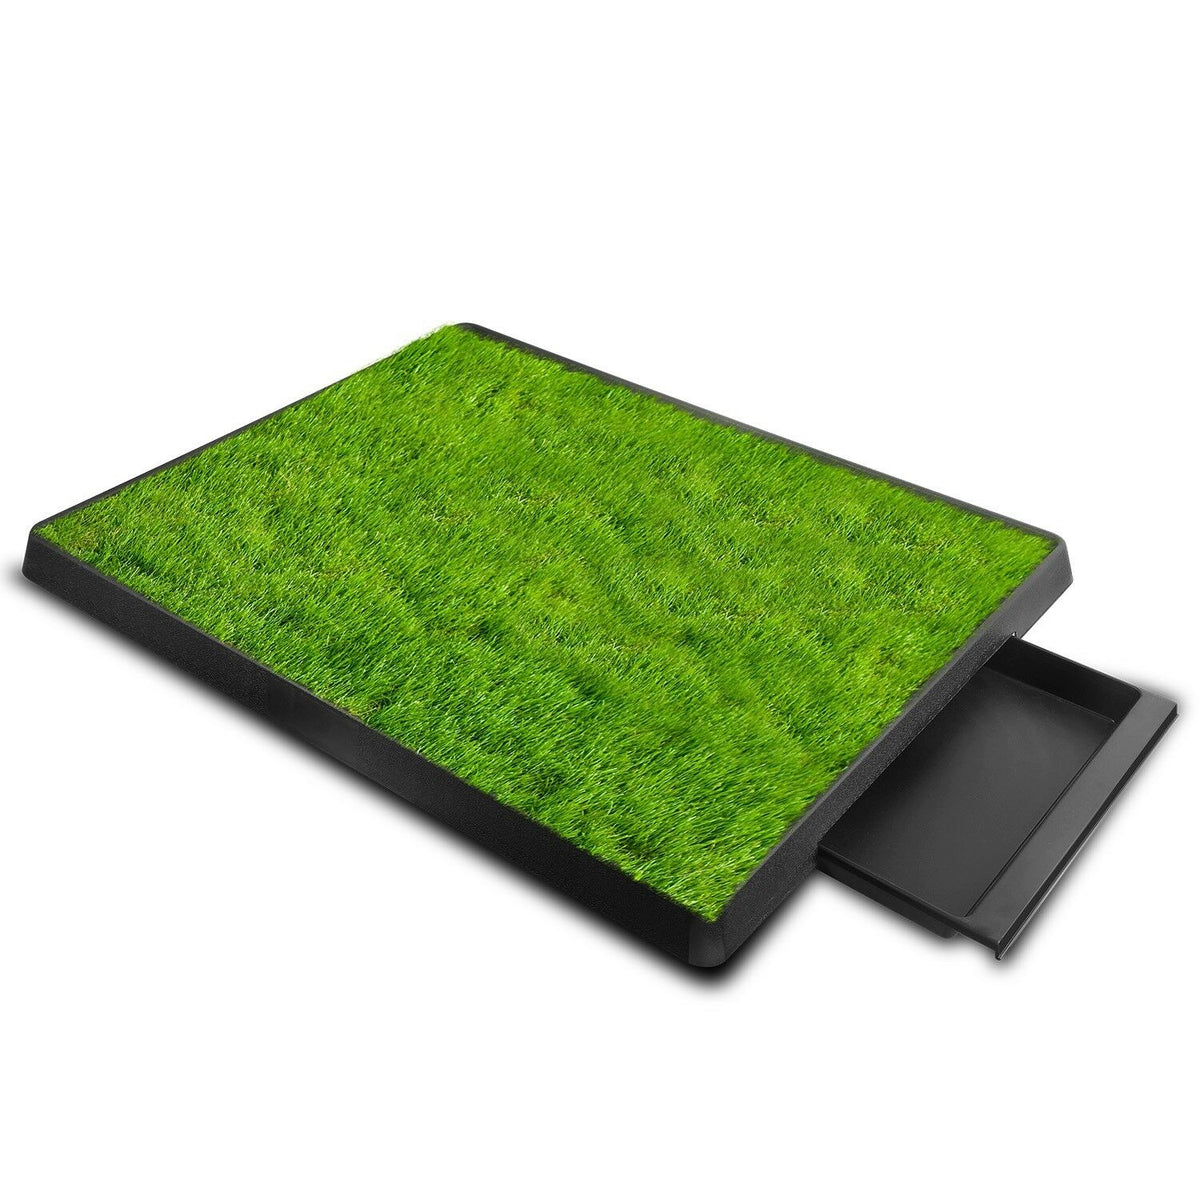 Pet Toilet Trainer Grass Mat for Puppy Potty Training - Main Image 7